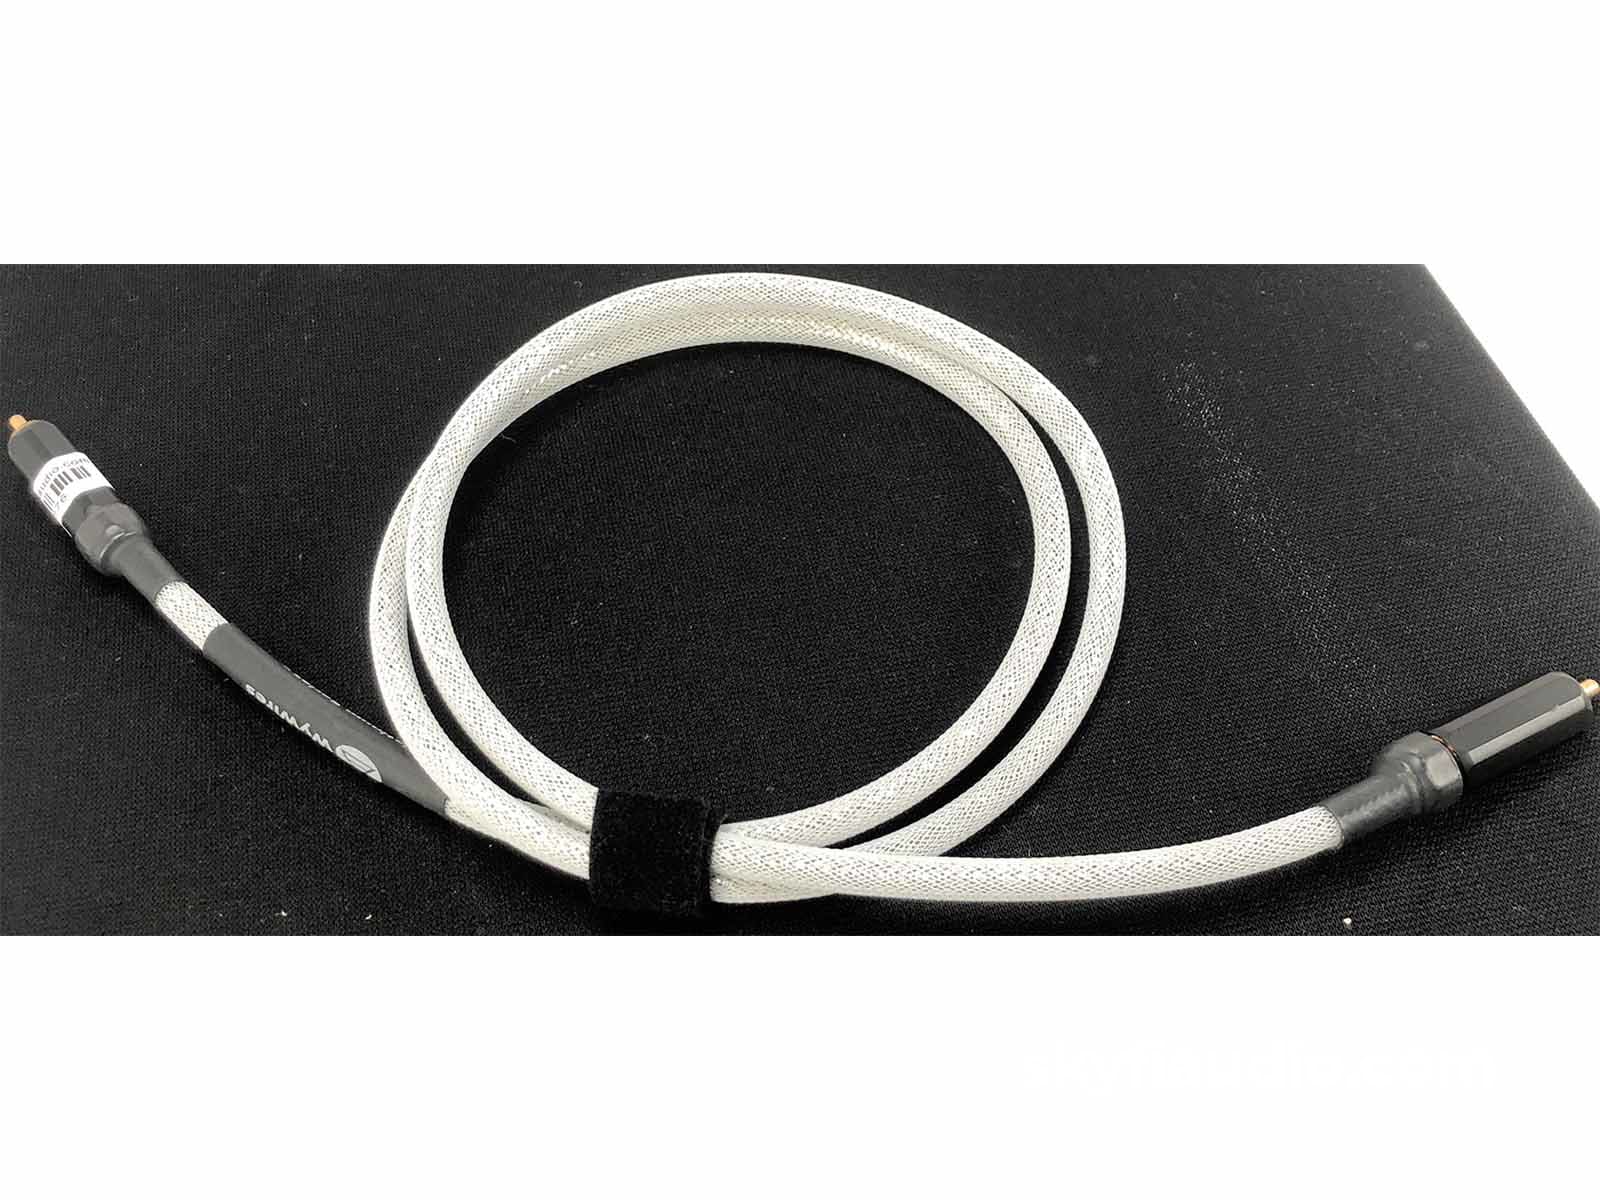 Wywires Litespd Coaxial Digital Cable - Silver W/Furutech Connectors 4 Cables